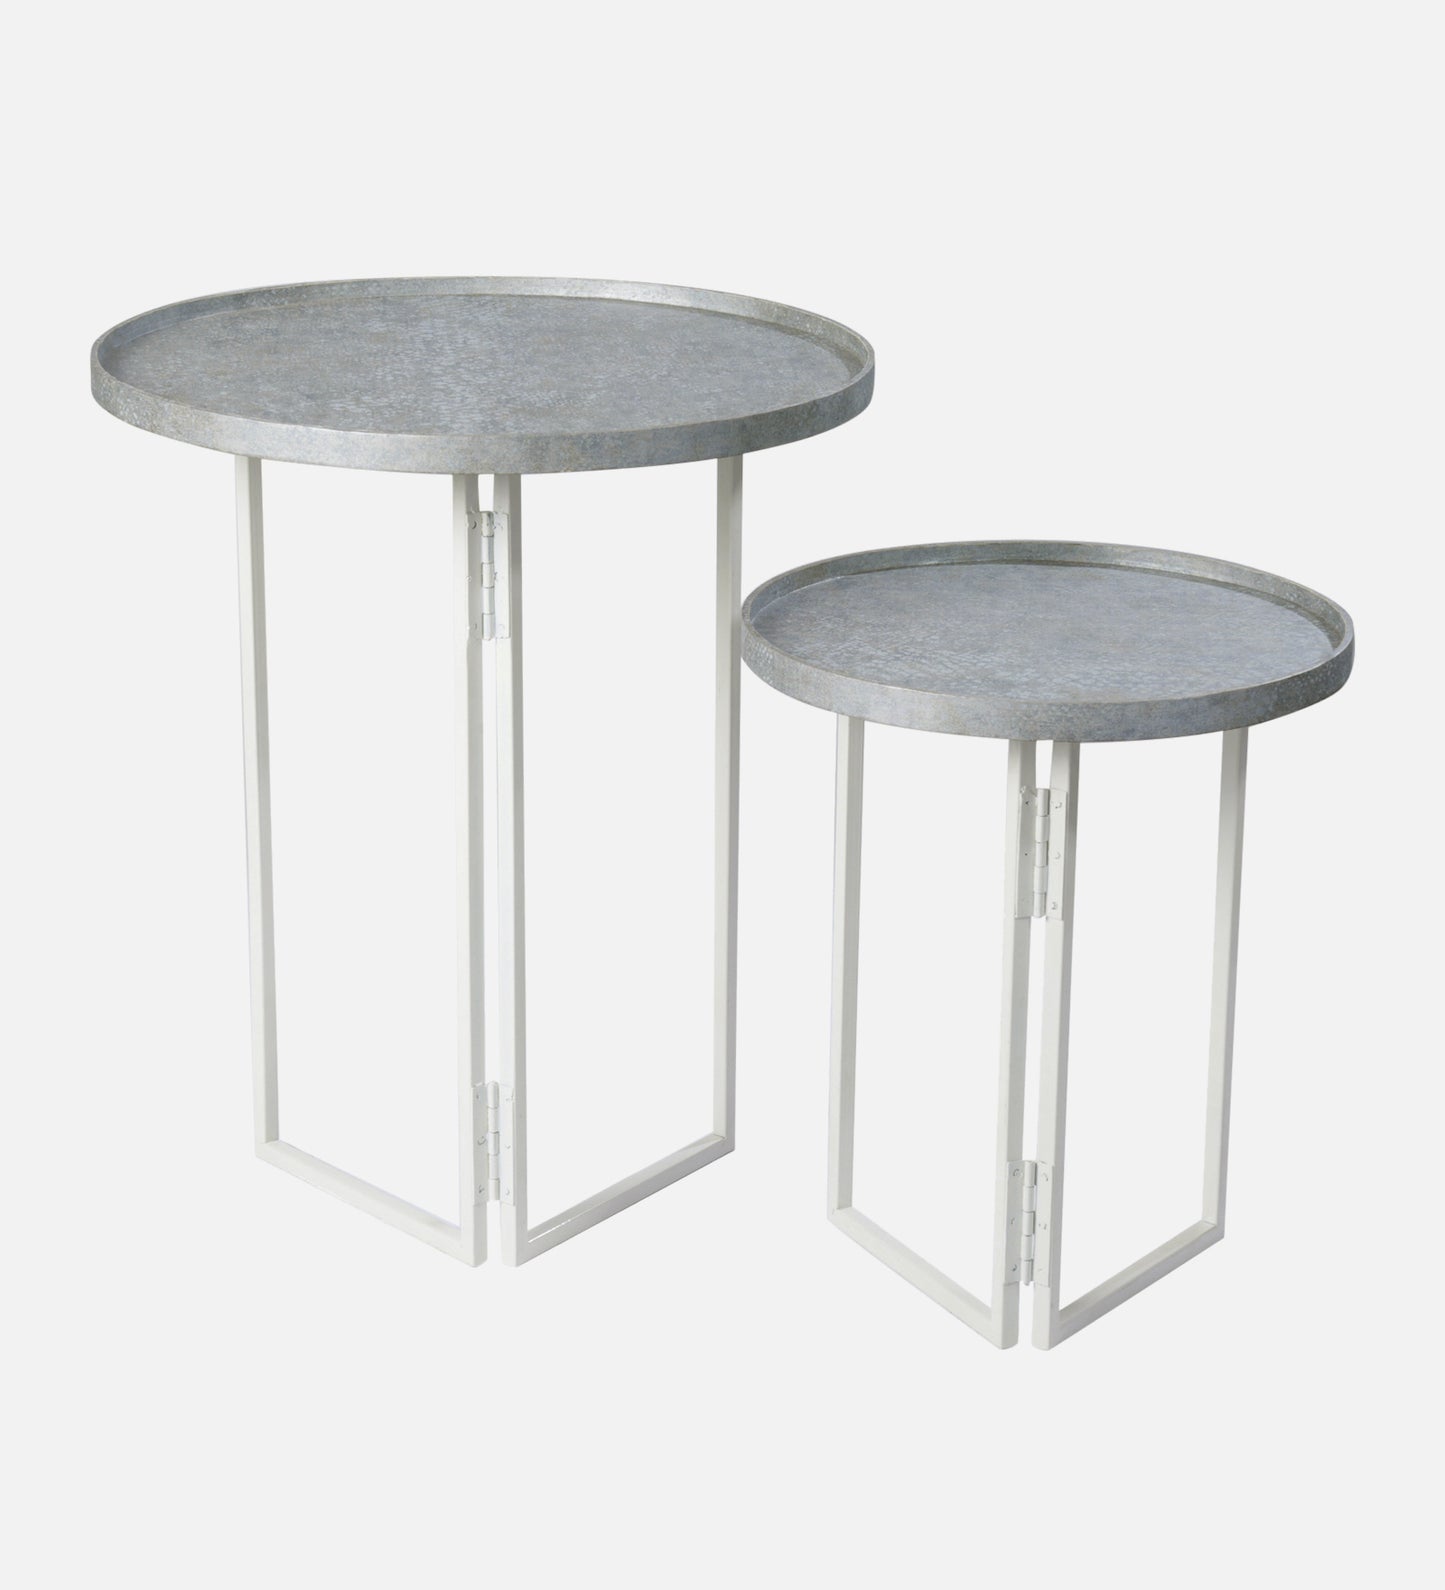 Transcendent Tinge Powder Blue Round Oblique Nesting Tables, Side Tables, Wooden Tables, Living Room Decor by A Tiny Mistake